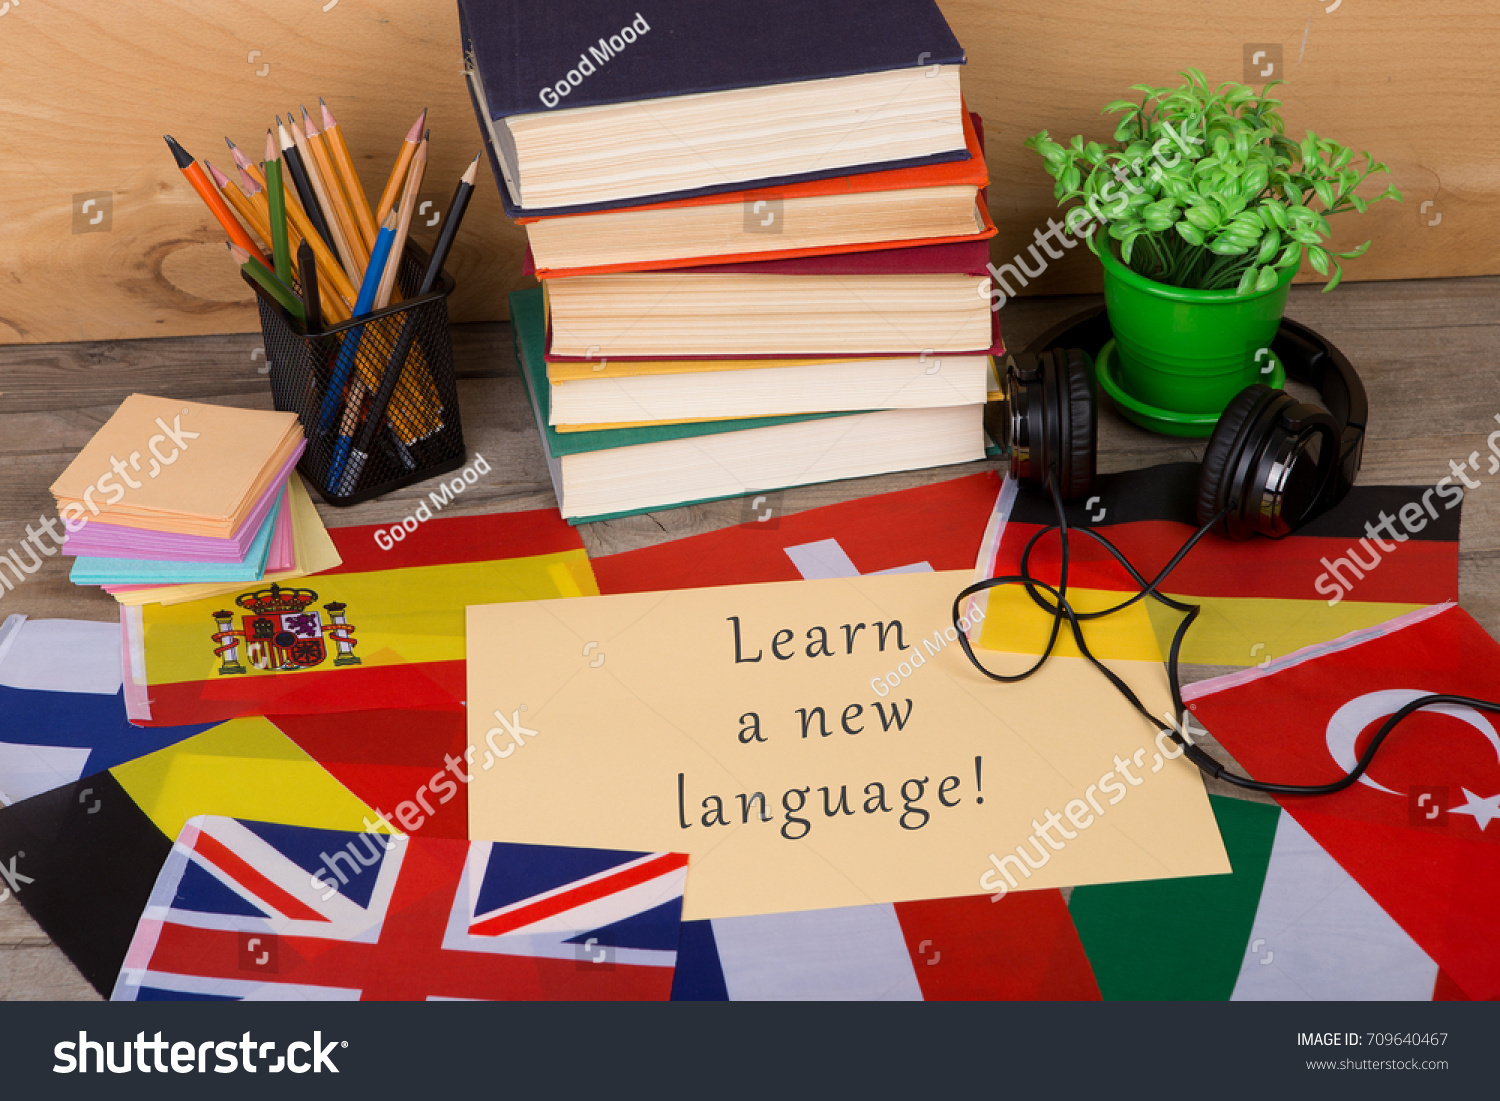 Learning languages concept - paper with text "Learn a new language!", flags, books, headphones, pencils on wooden background #709640467